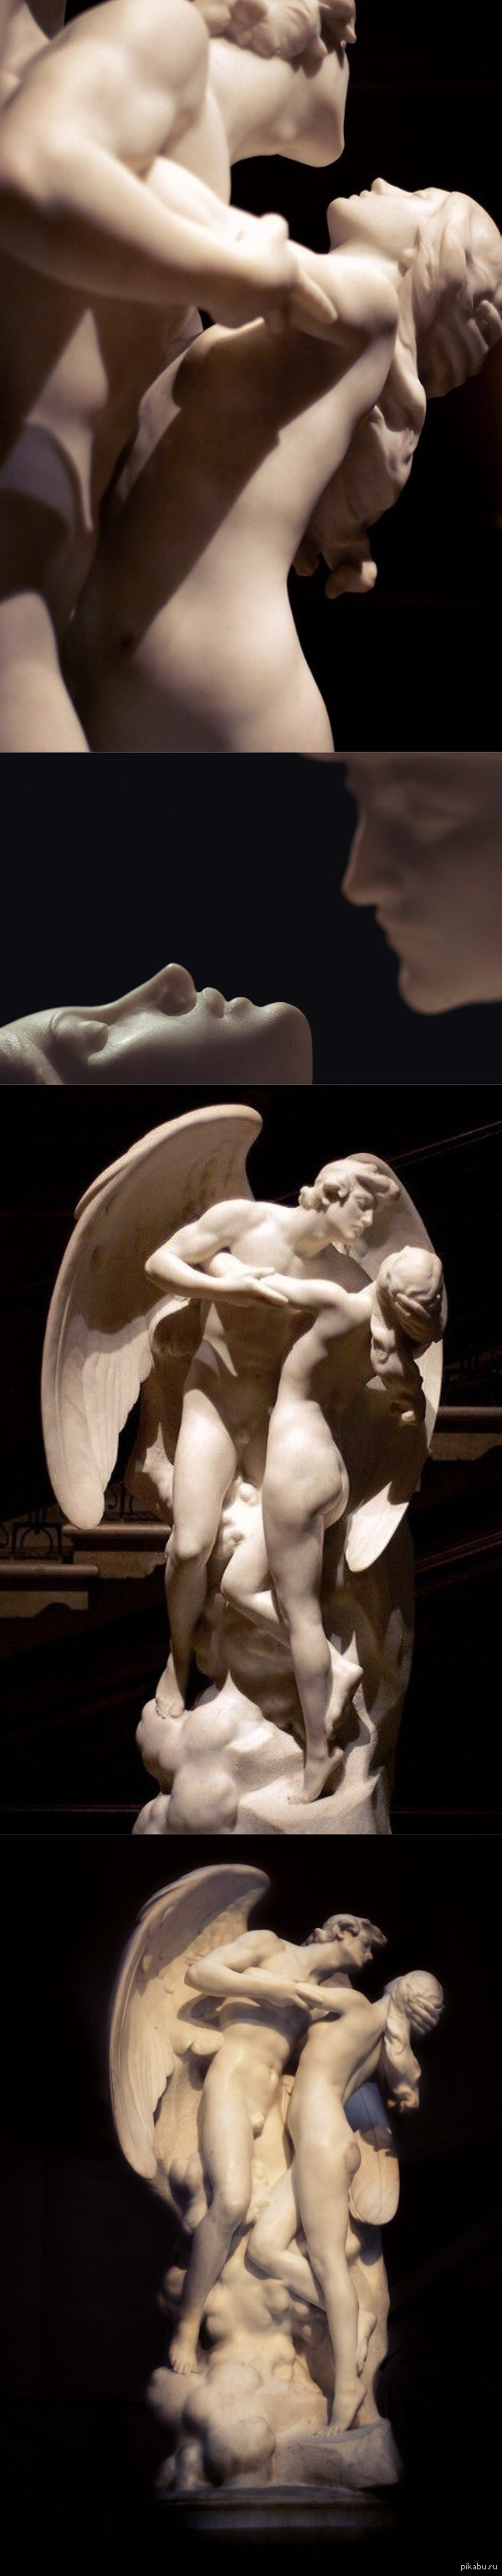 &quot;The Sons of God saw the Daughters of Men That They Were Fair&quot;, Daniel Chester French, Corcoran Gallery of Art, Washington, D.C. "      ",   ,     , , , 1923.